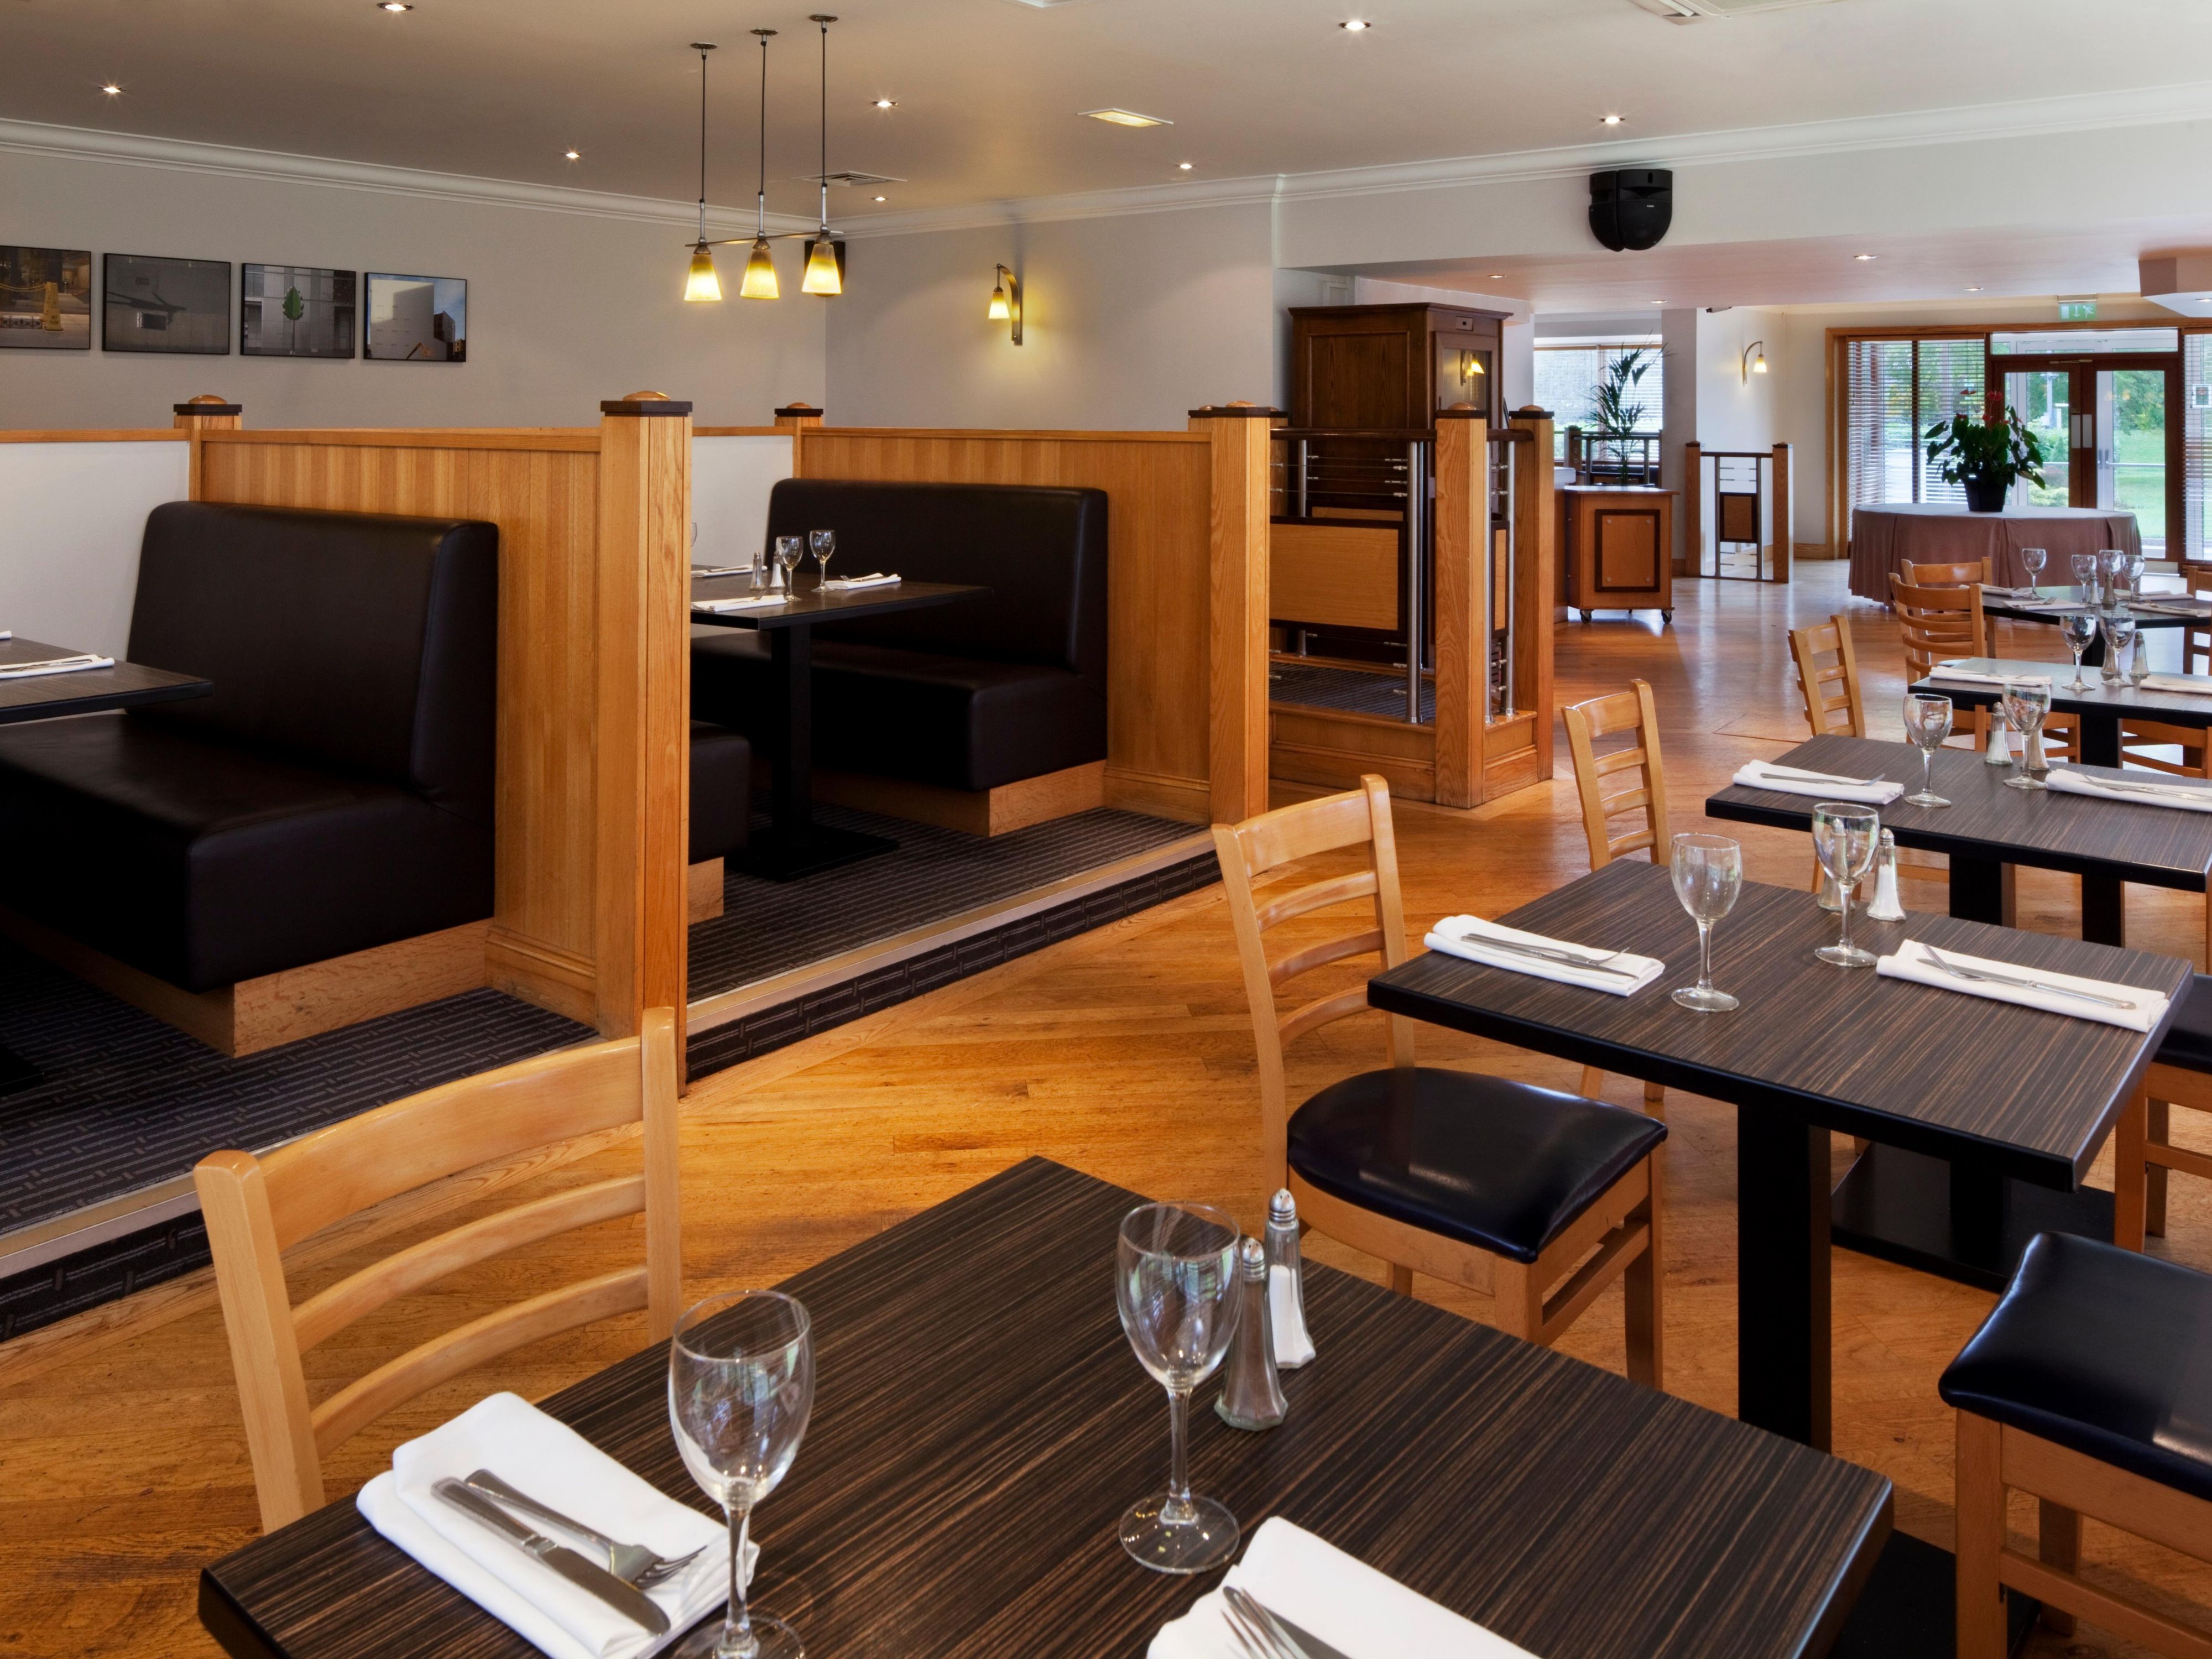 Our 90 seater light, airy and modern Restaurant serves a full English breakfast, lunch and dinner.  We pride ourselves of being a great dining venue, so if you want to grab a quick bite to eat or relax with friends or colleagues we're sure that we'll be able to satisfy even the fussiest of taste buds.